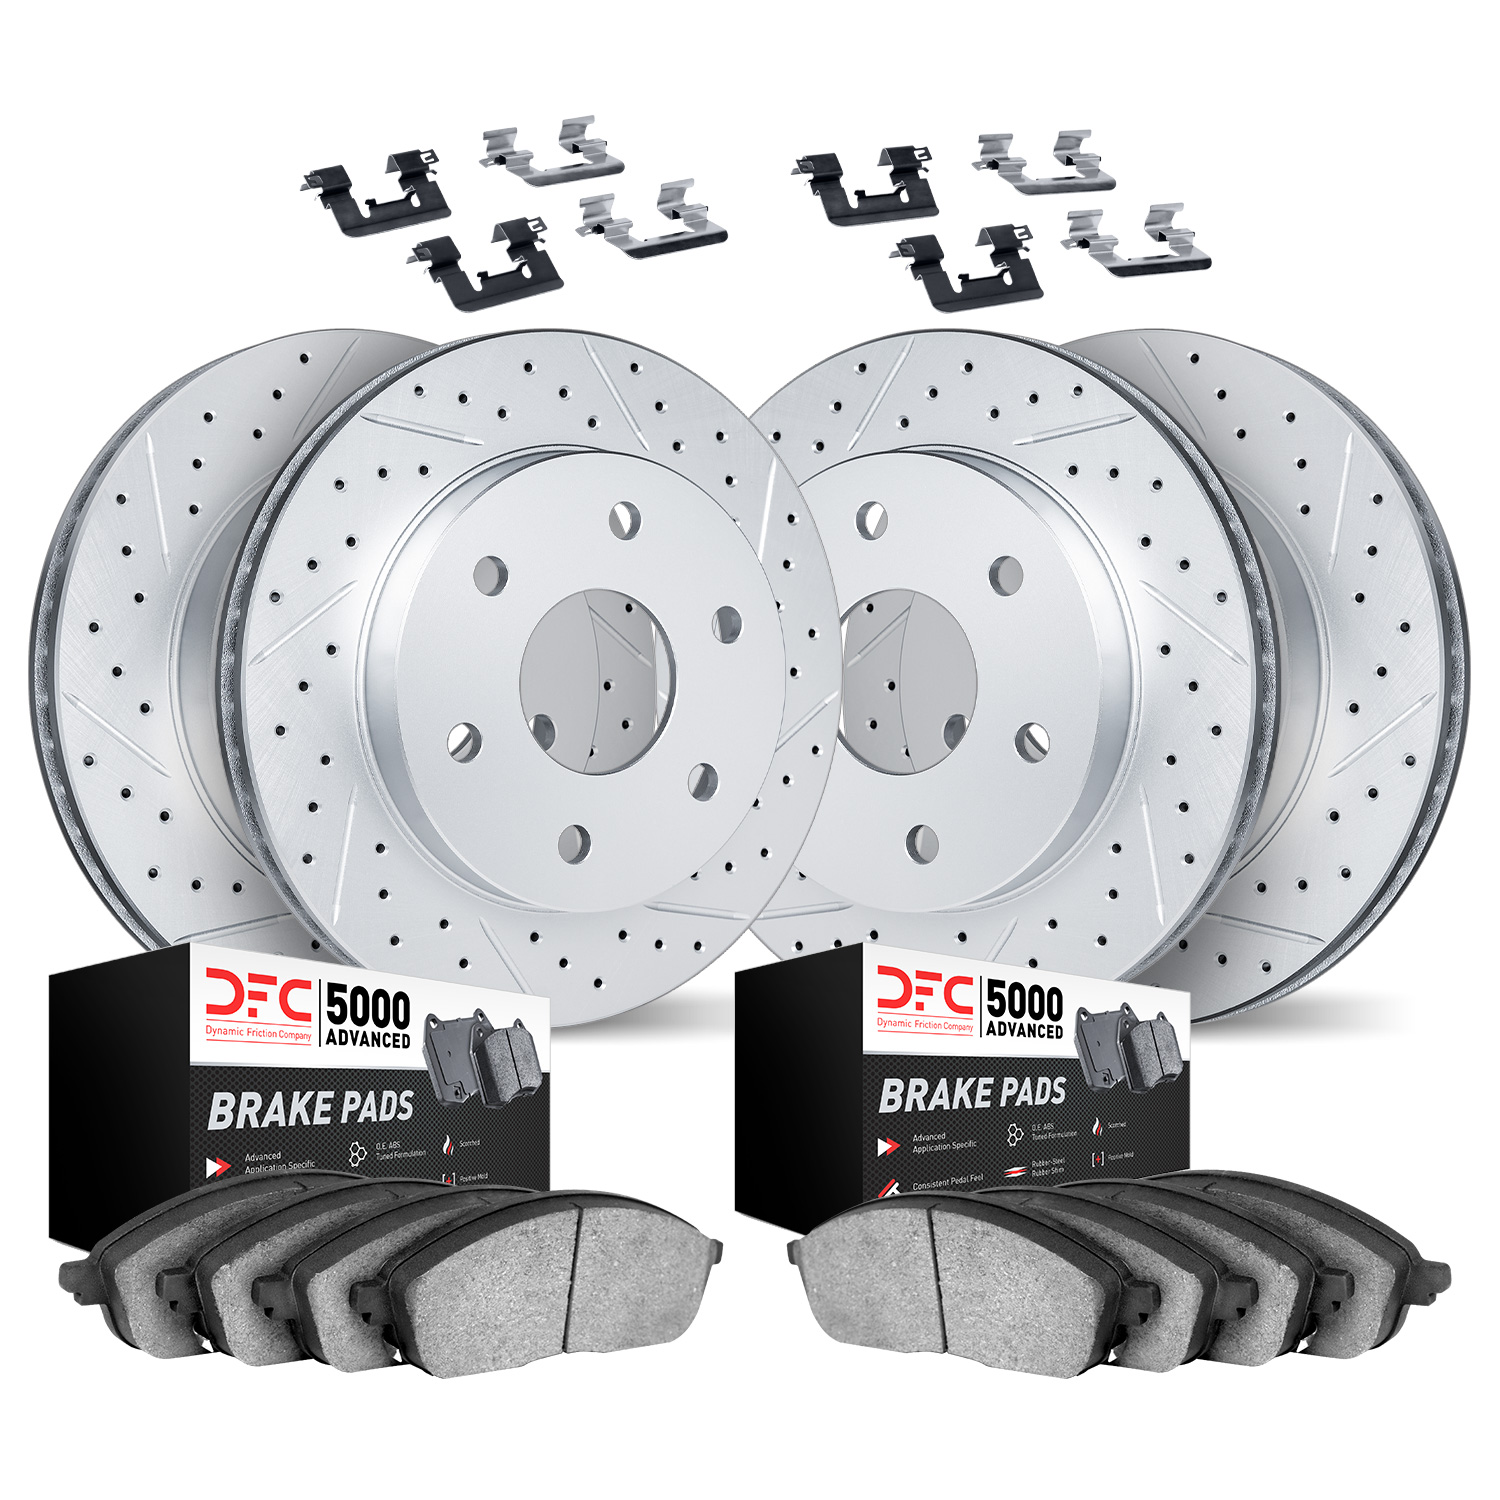 2514-48026 Geoperformance Drilled/Slotted Rotors w/5000 Advanced Brake Pads Kit & Hardware, 2002-2005 GM, Position: Front and Re